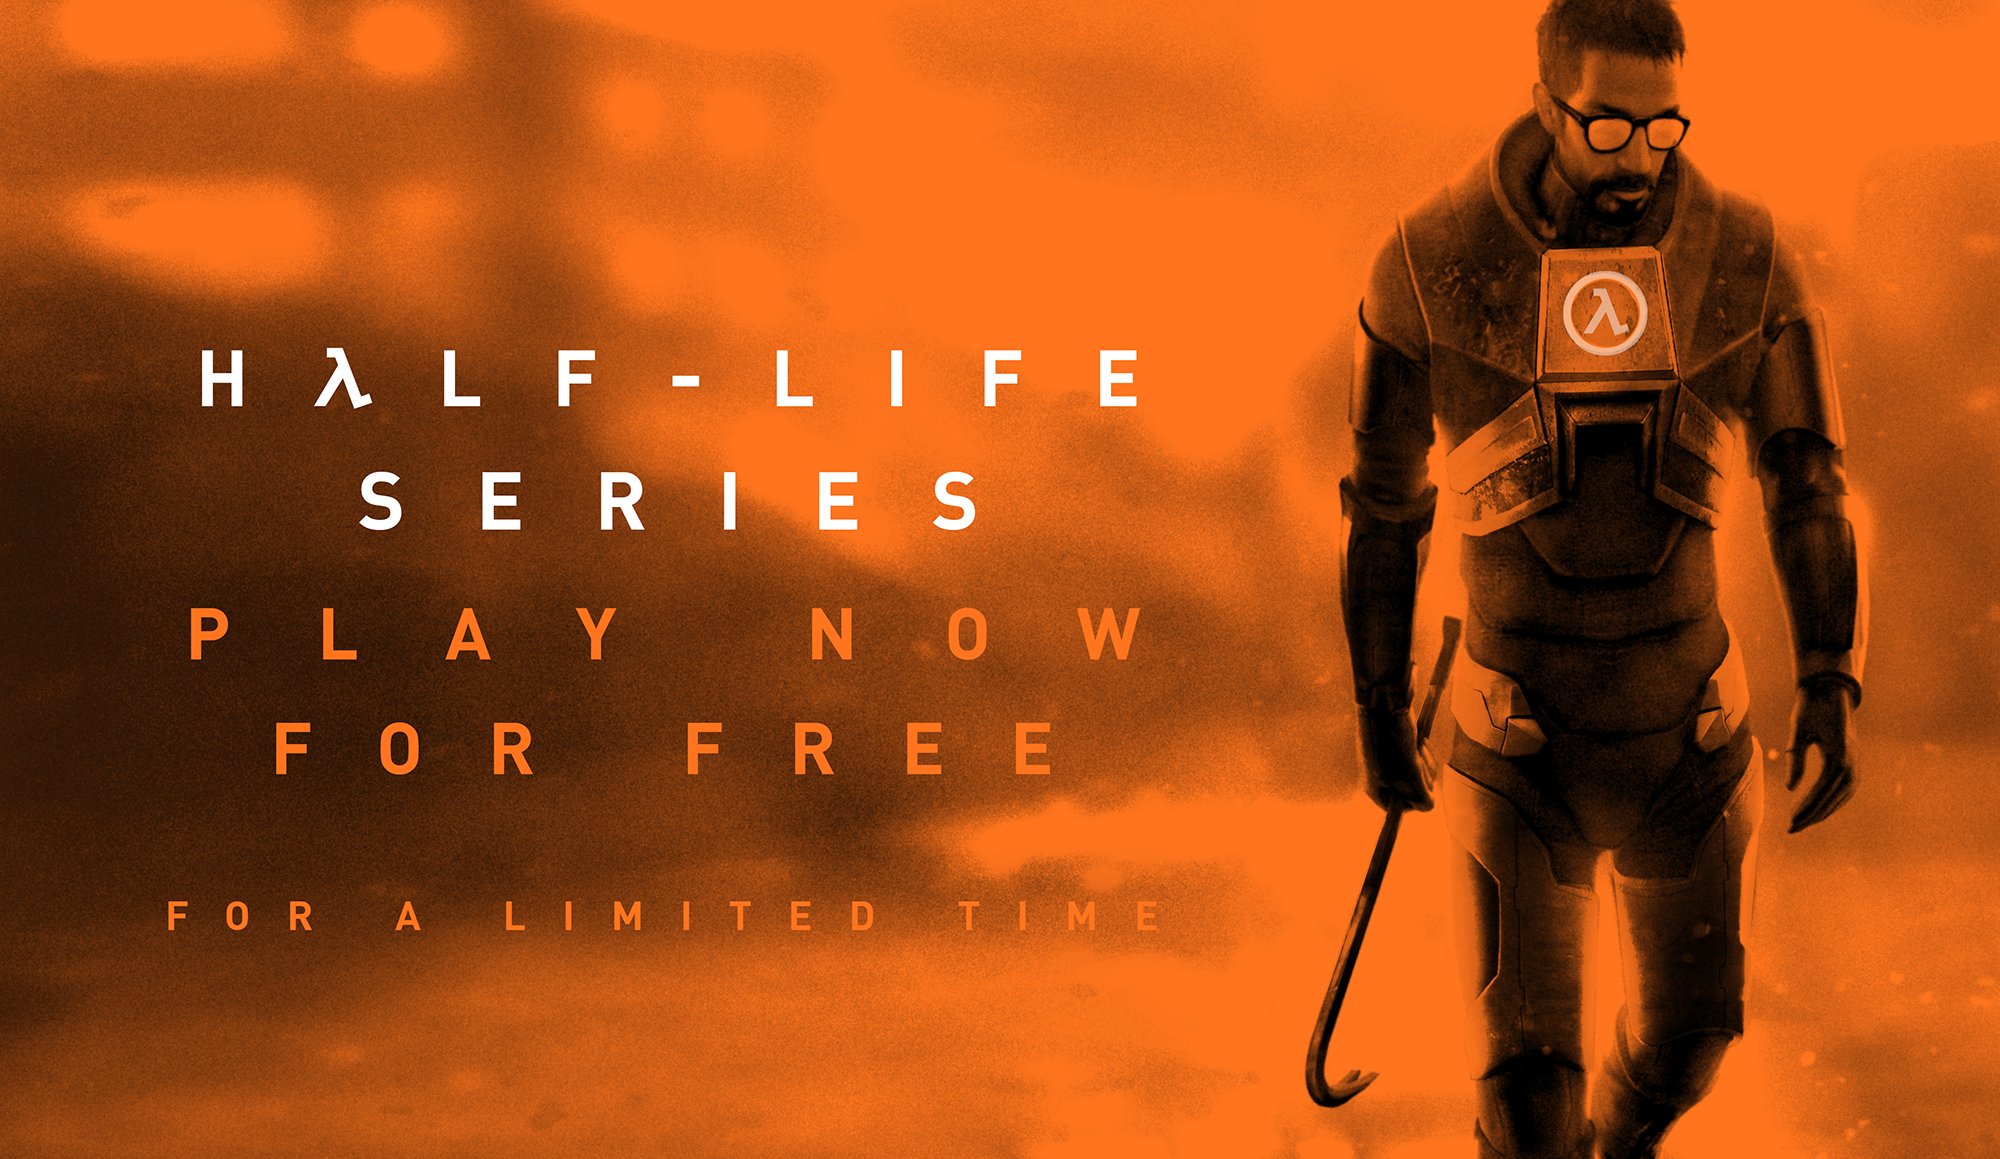 After a major update to Half-Life and a free giveaway on Steam, the game's  online presence has grown more than 20 times